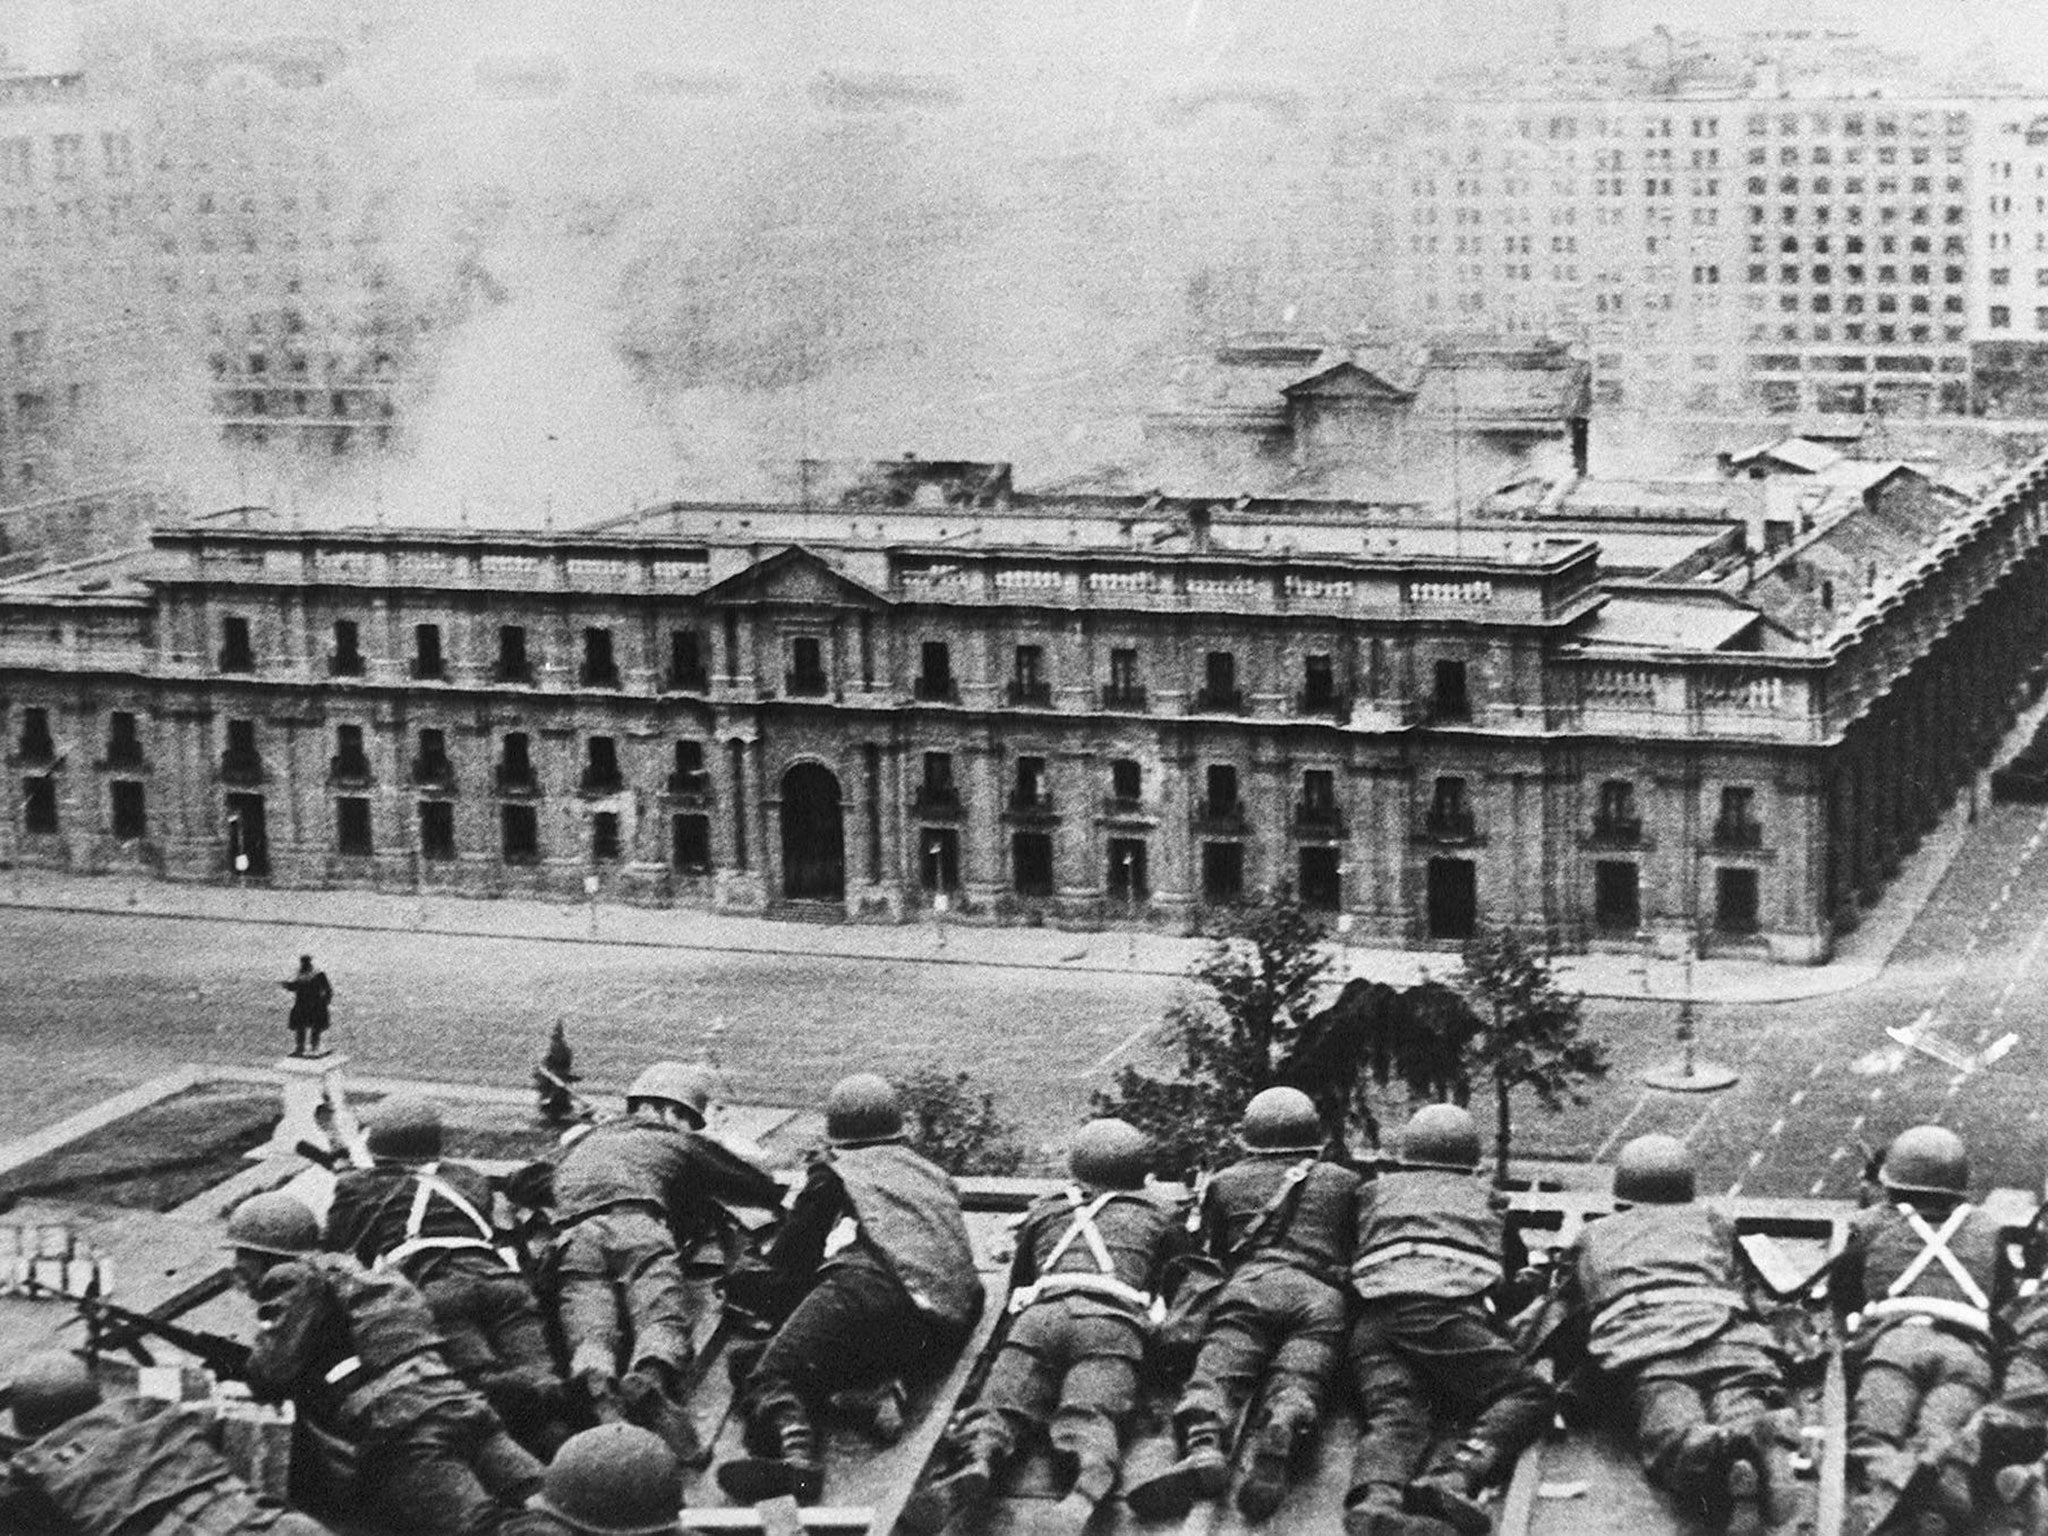 Chilean Army troops fire on La Moneda Palace, Santiago, during the 1973 coup led by General Augusto Pinochet. President Salvador Allende died in the attack